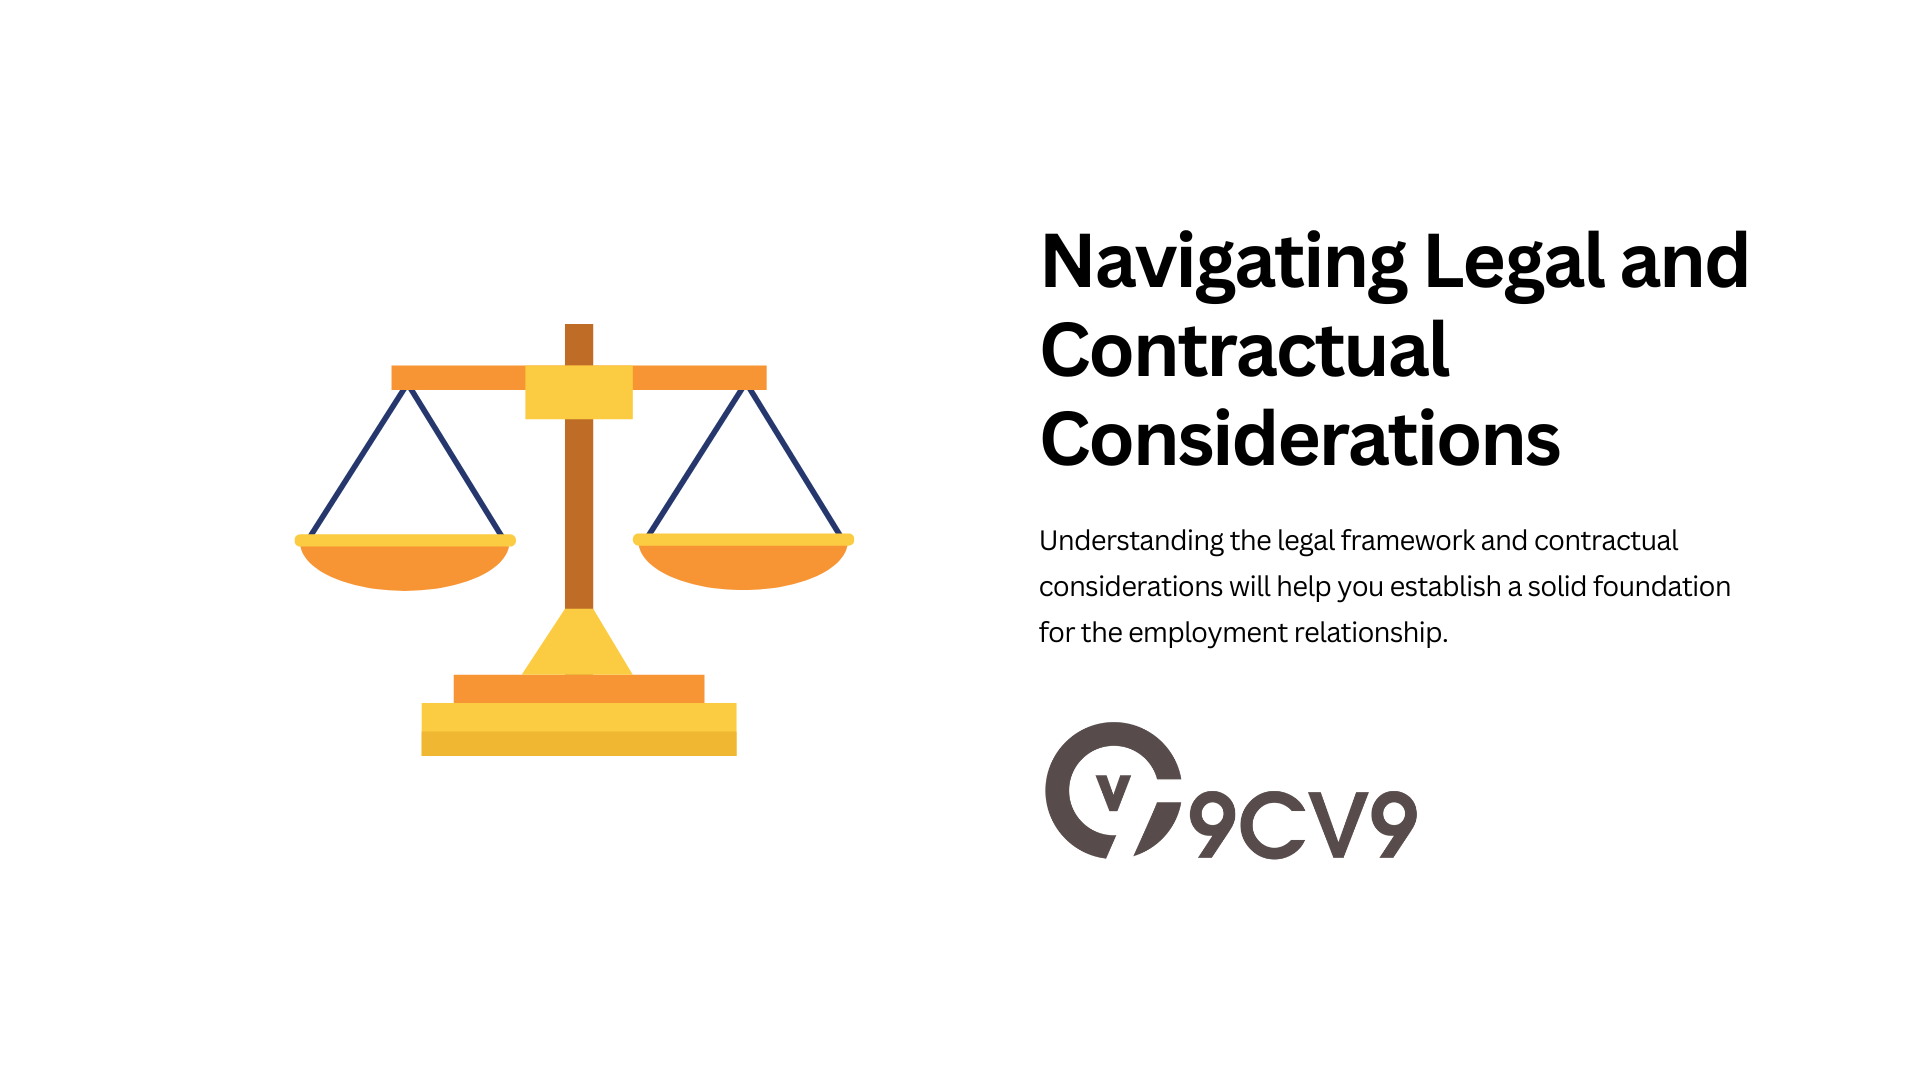 Navigating Legal and Contractual Considerations